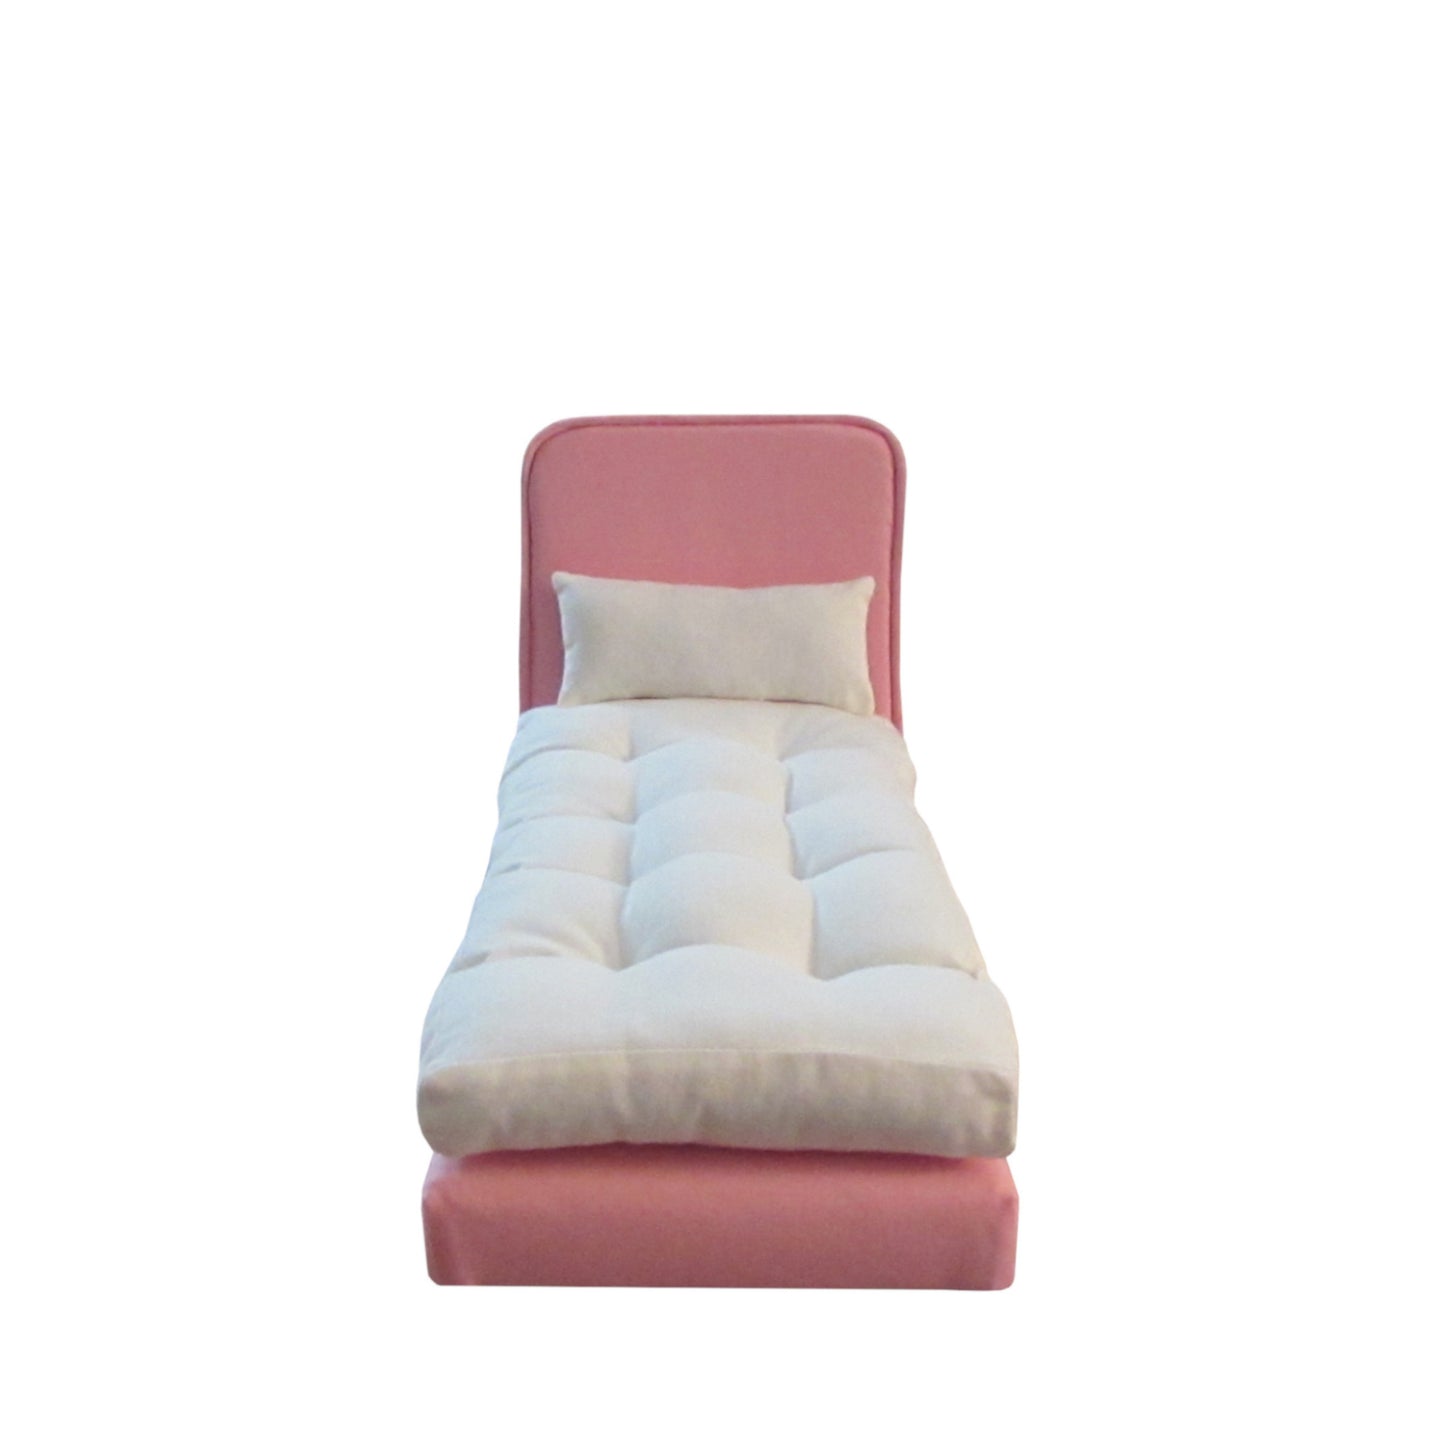 Four Upholstered Doll Beds for 11 1/2- inch and 12-inch dolls